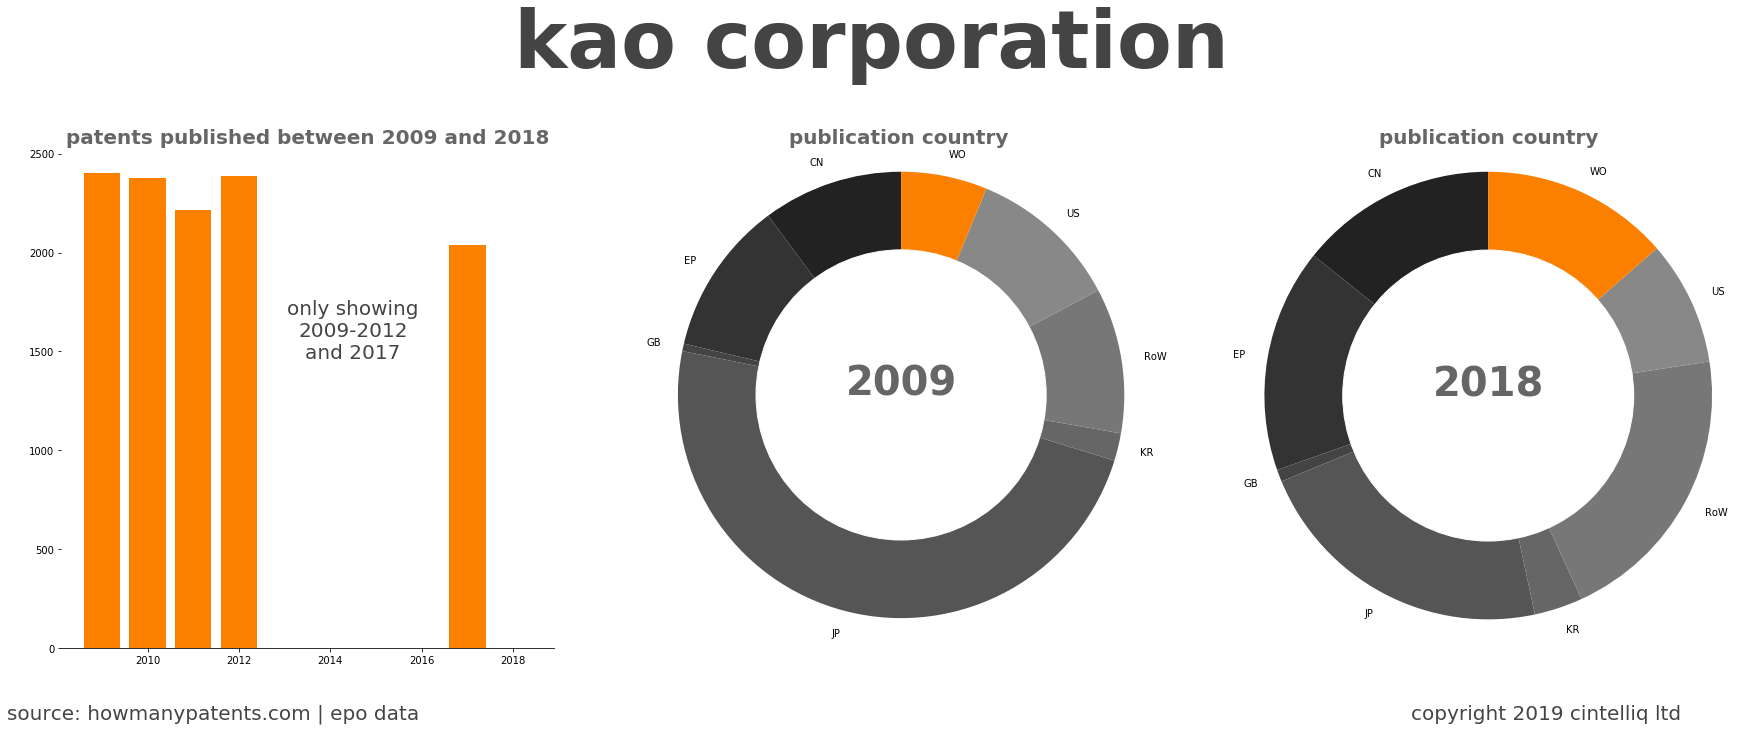 summary of patents for Kao Corporation